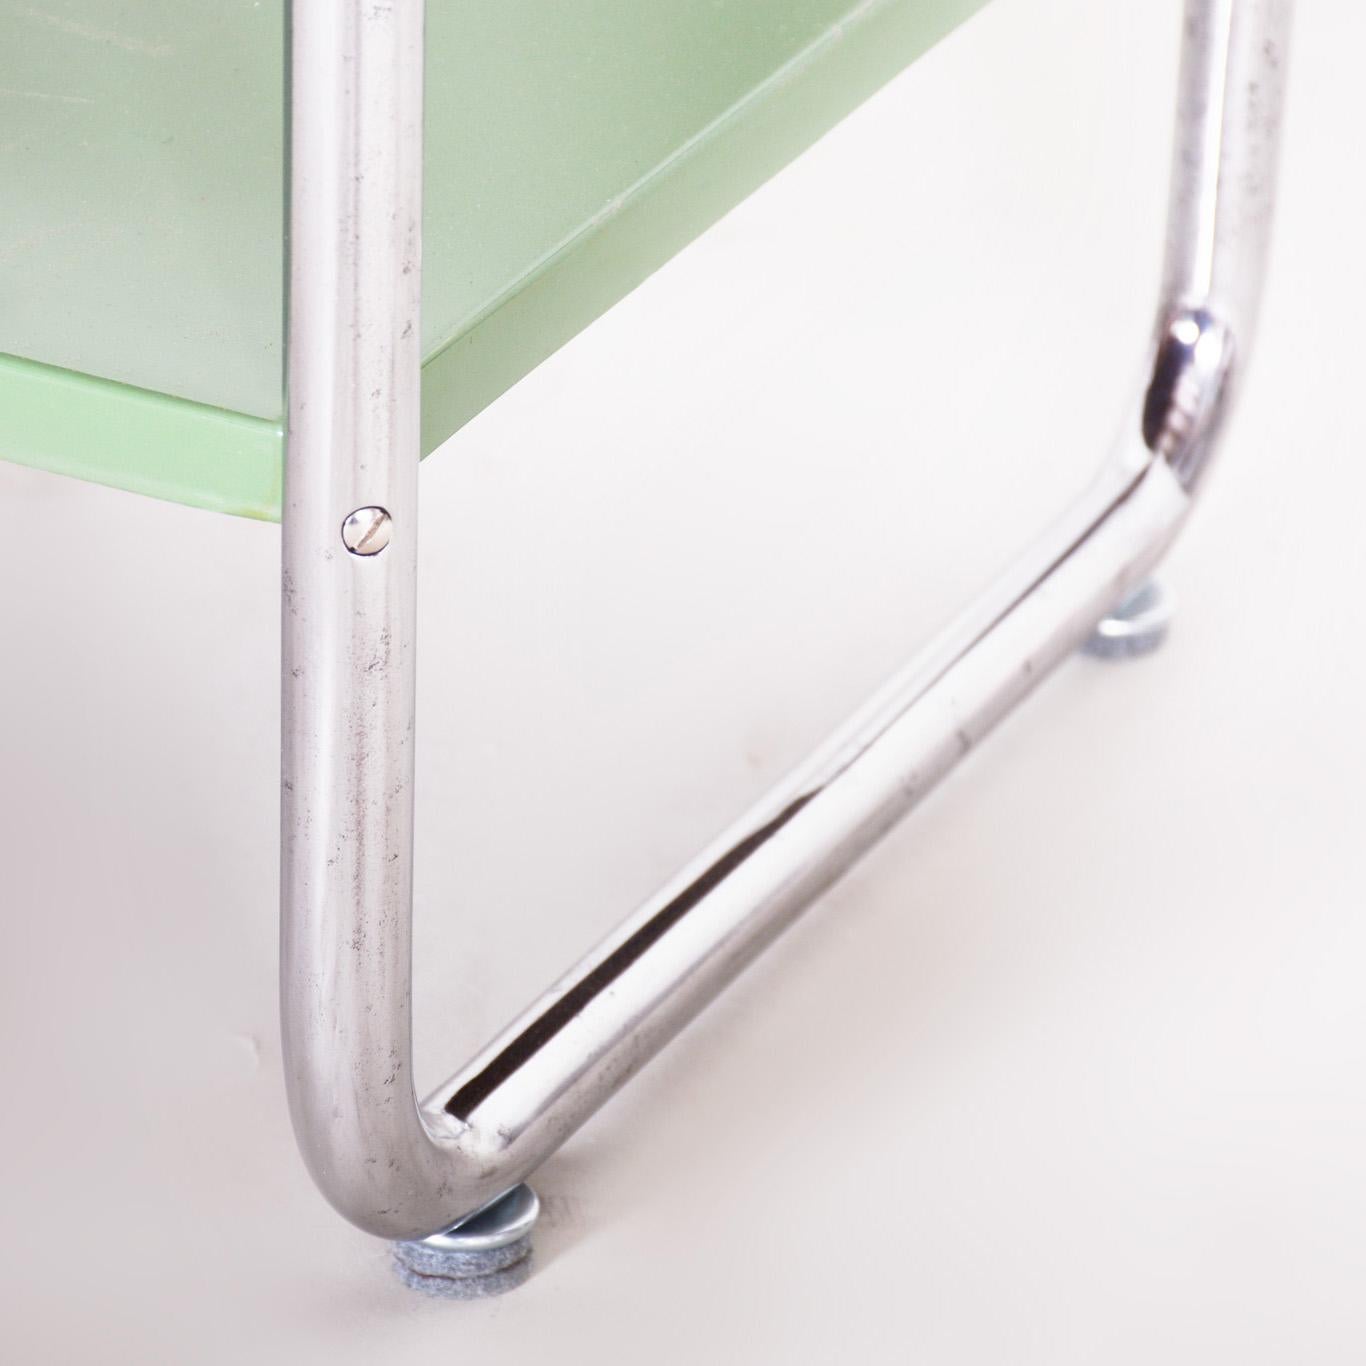 Restored Bauhaus Pair of Bed-Side Tables, Chrome-Plated Steel, Czech, 1930s For Sale 8